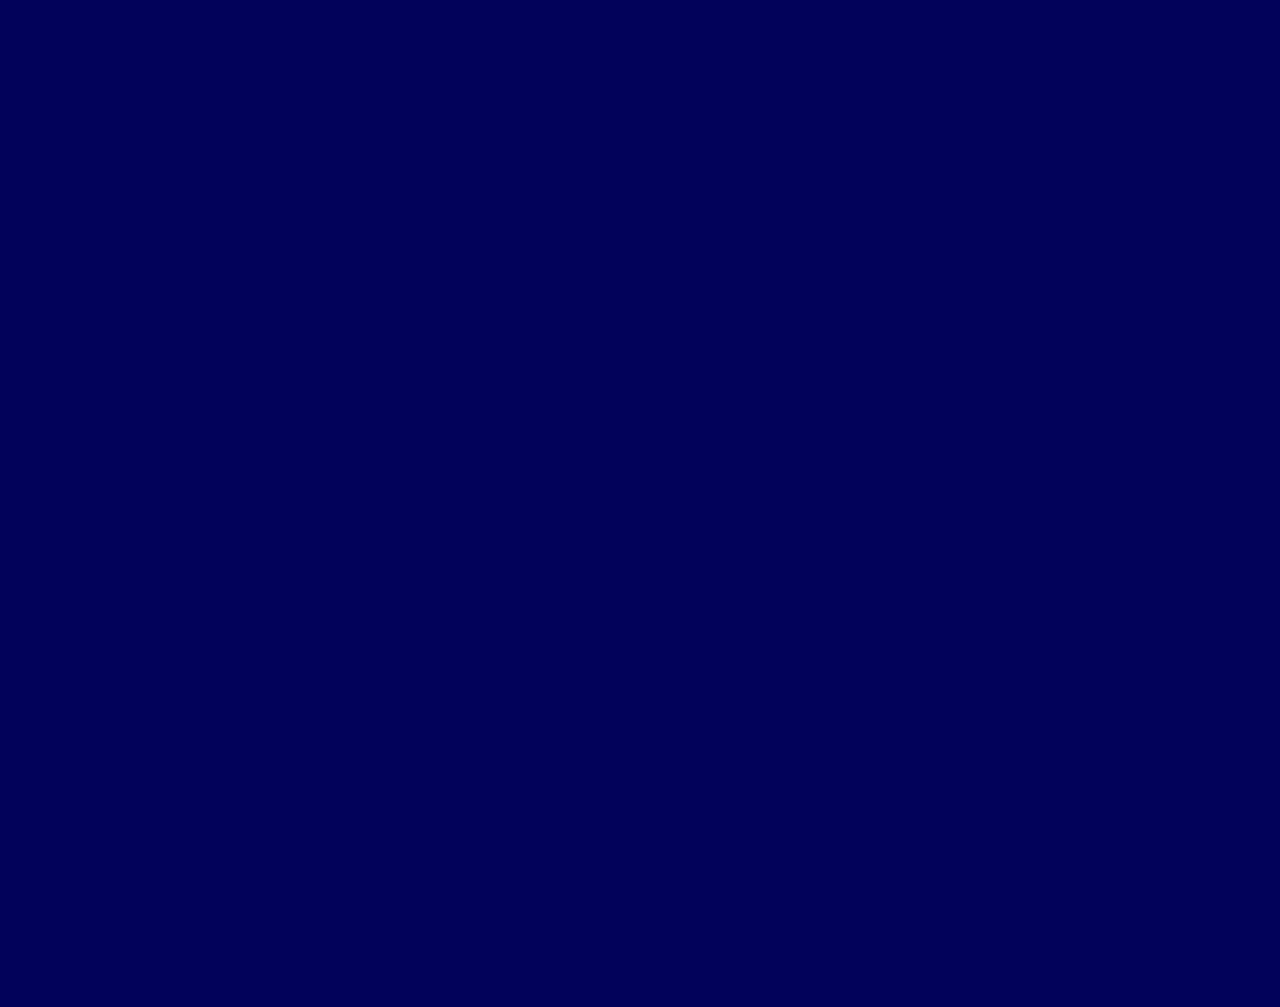 Navy Blue Solid Background For